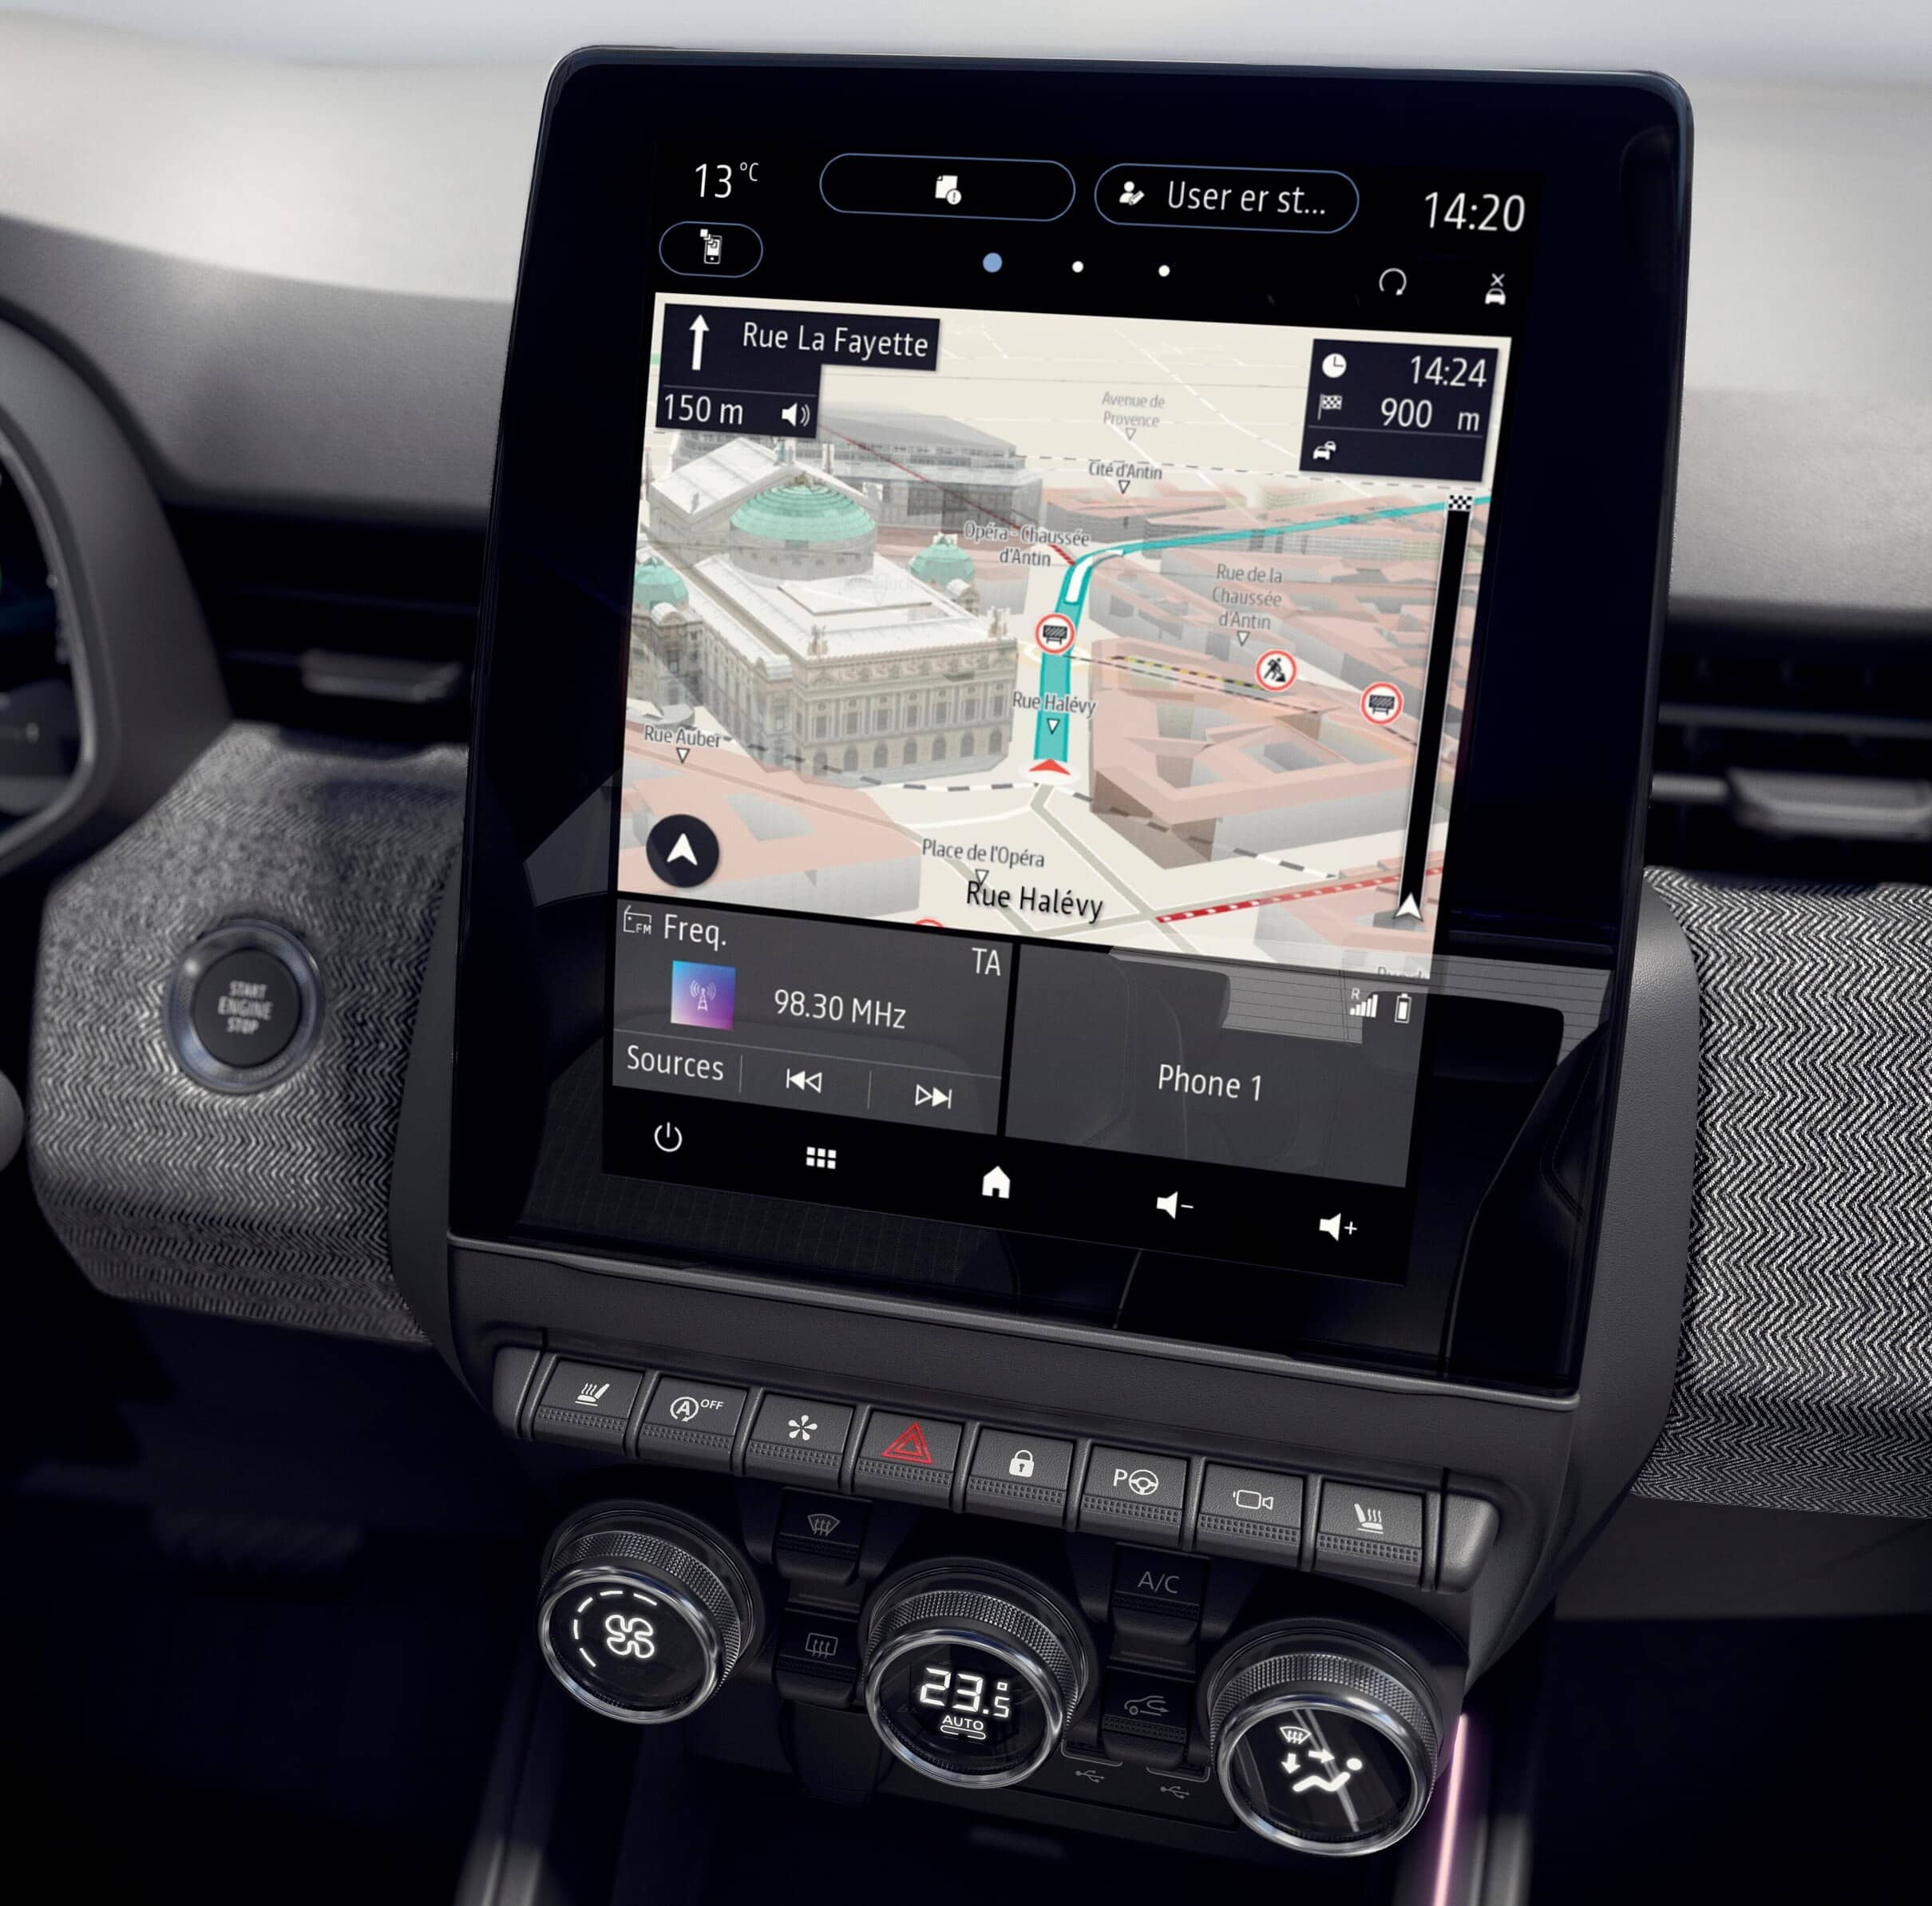 Close-up of Renault Clio Tech-E infotainment system with vibrant touchscreen display and intuitive interface.